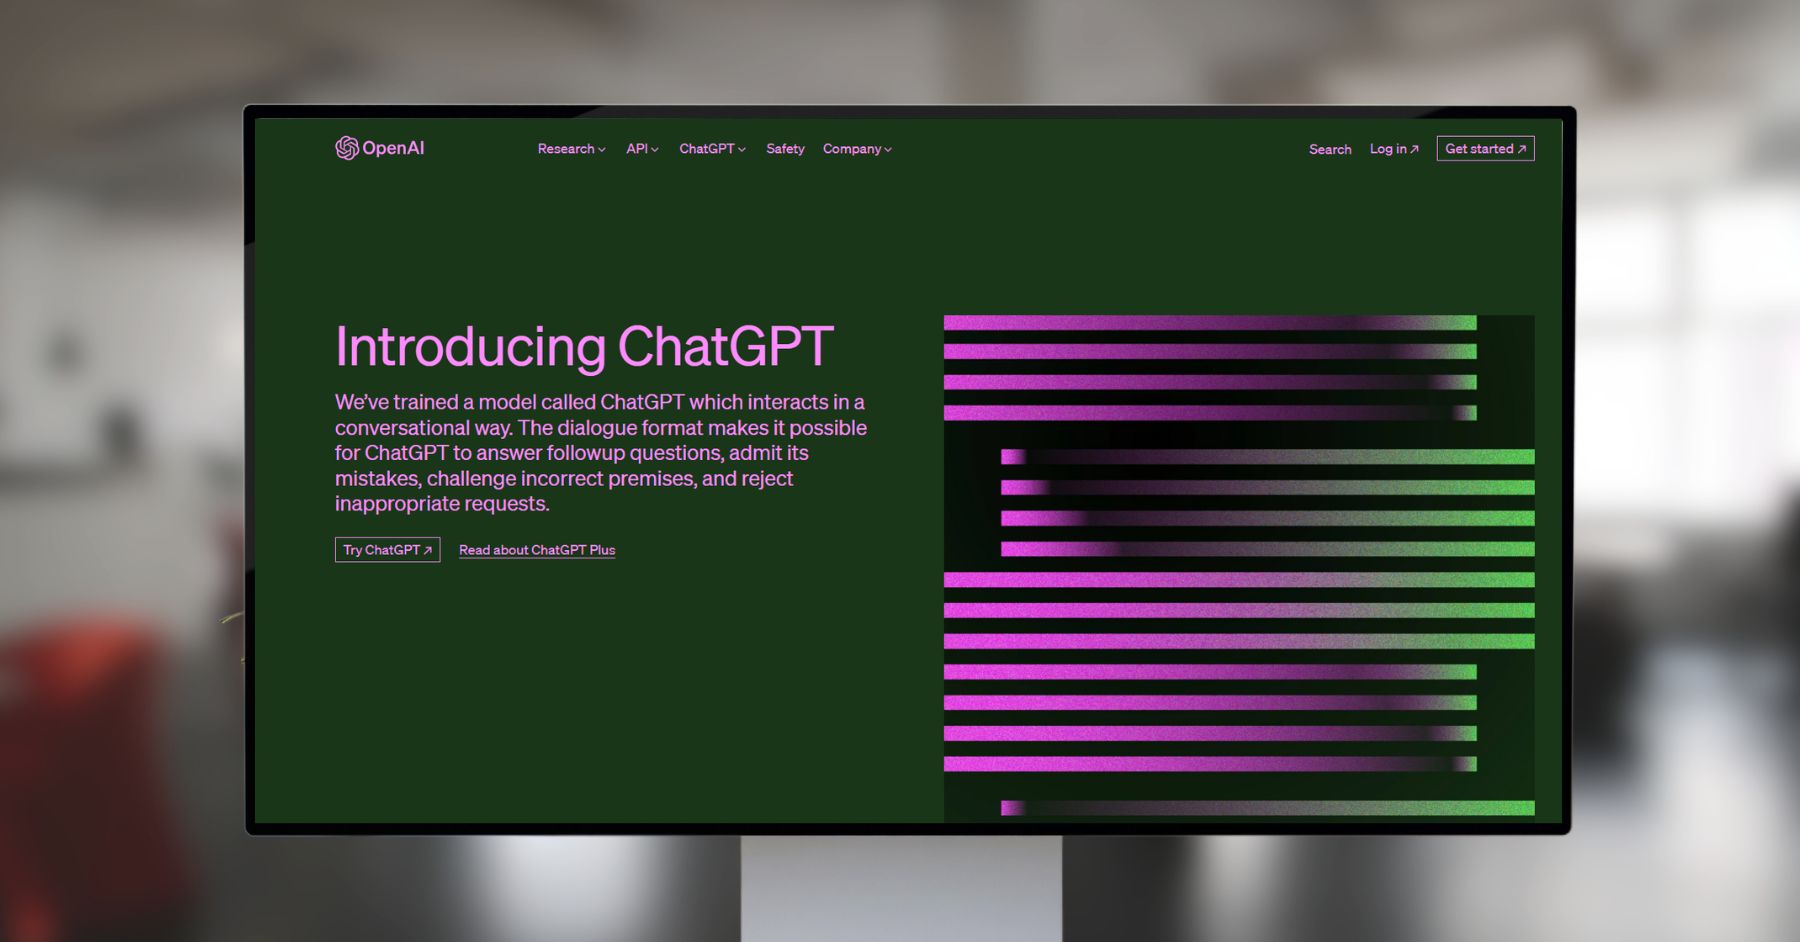 How to Use ChatGPT: The Ultimate Guide for Beginners